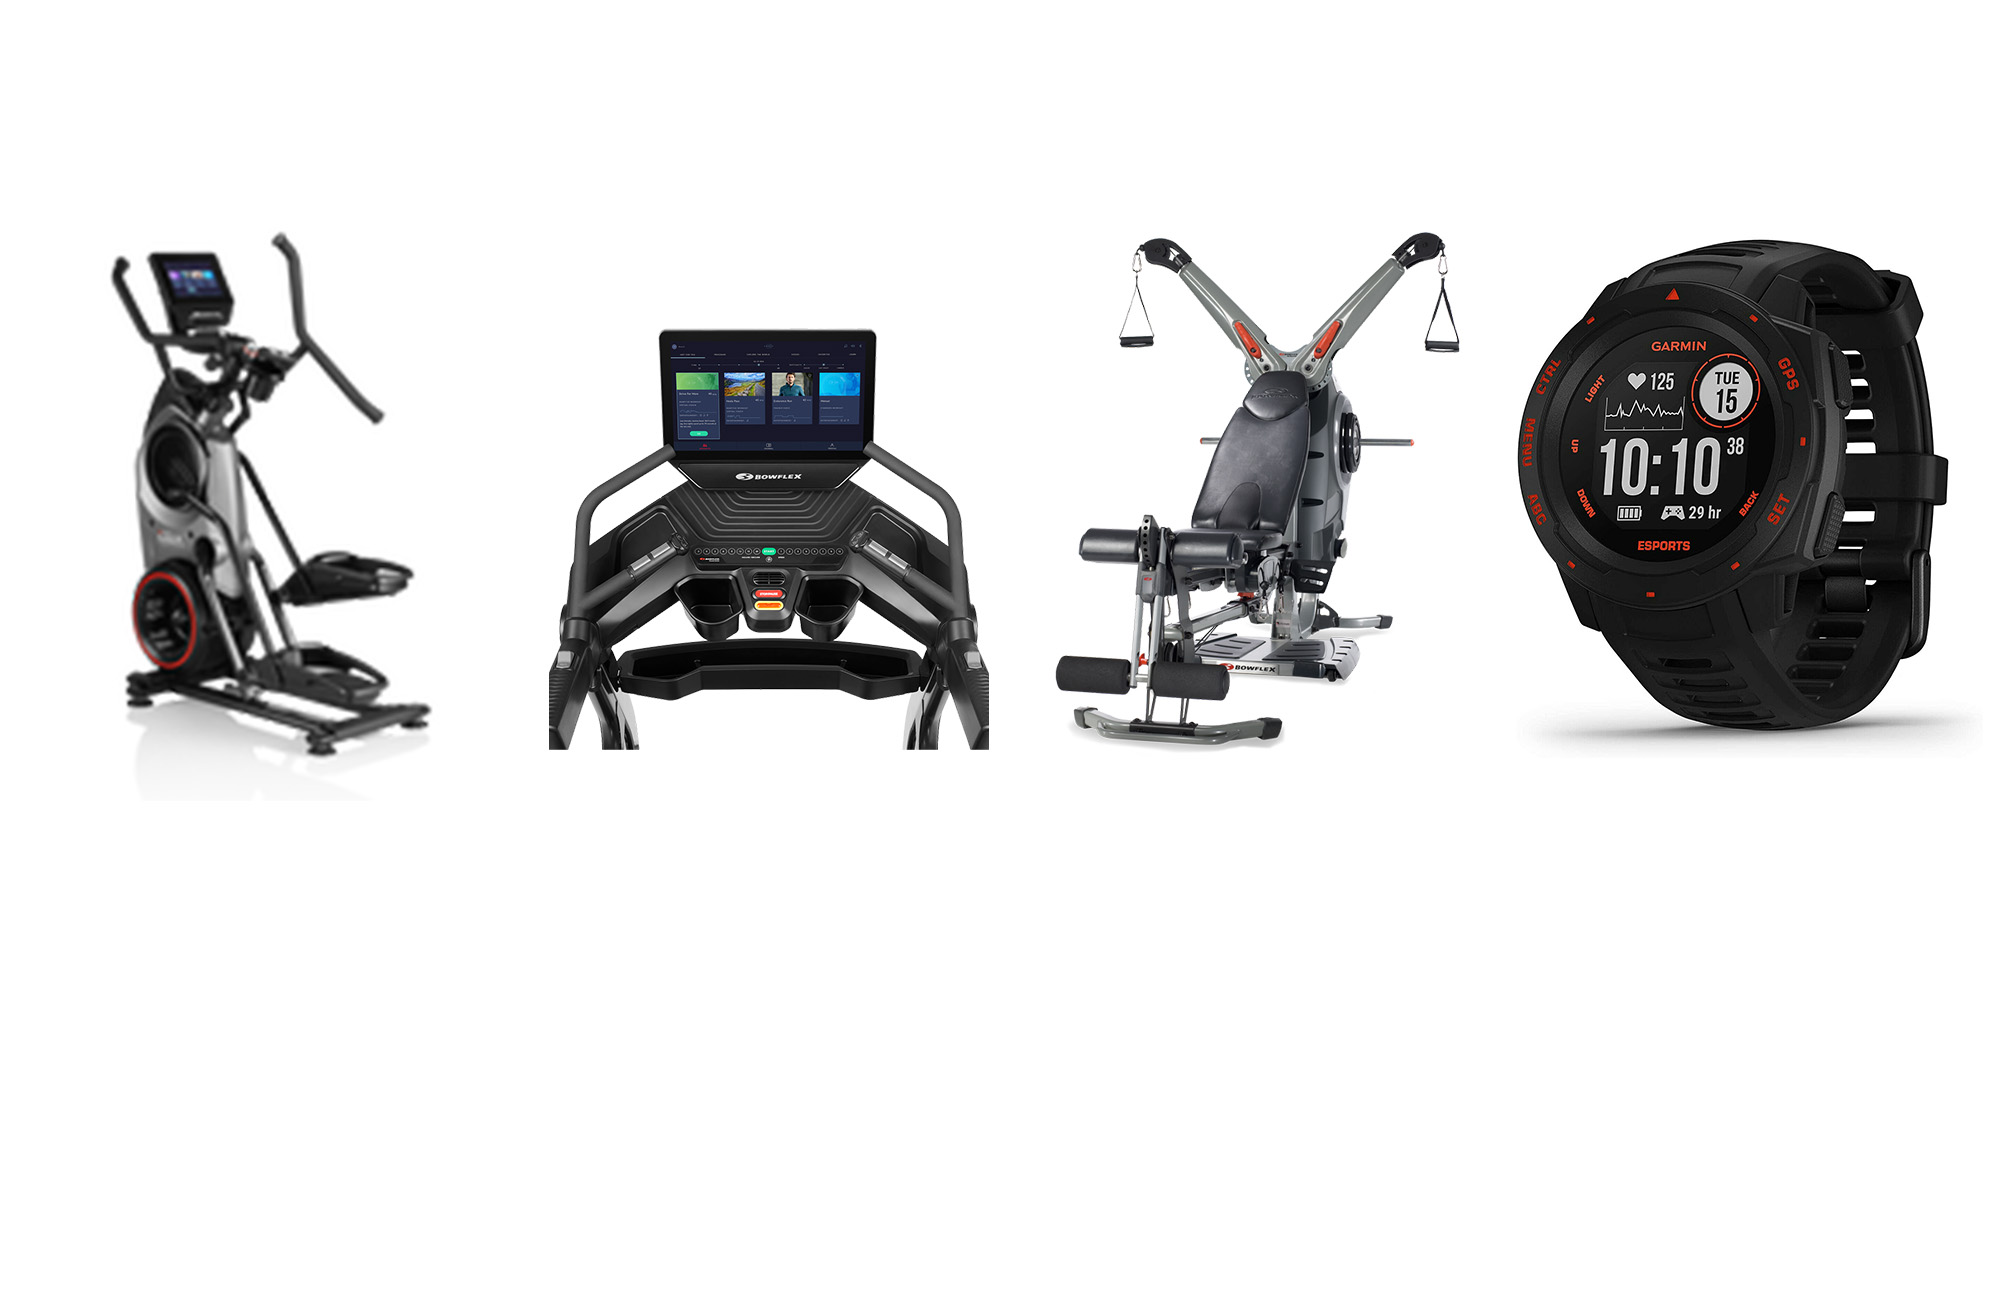 Save more than $200 with these Presidents Day fitness deals